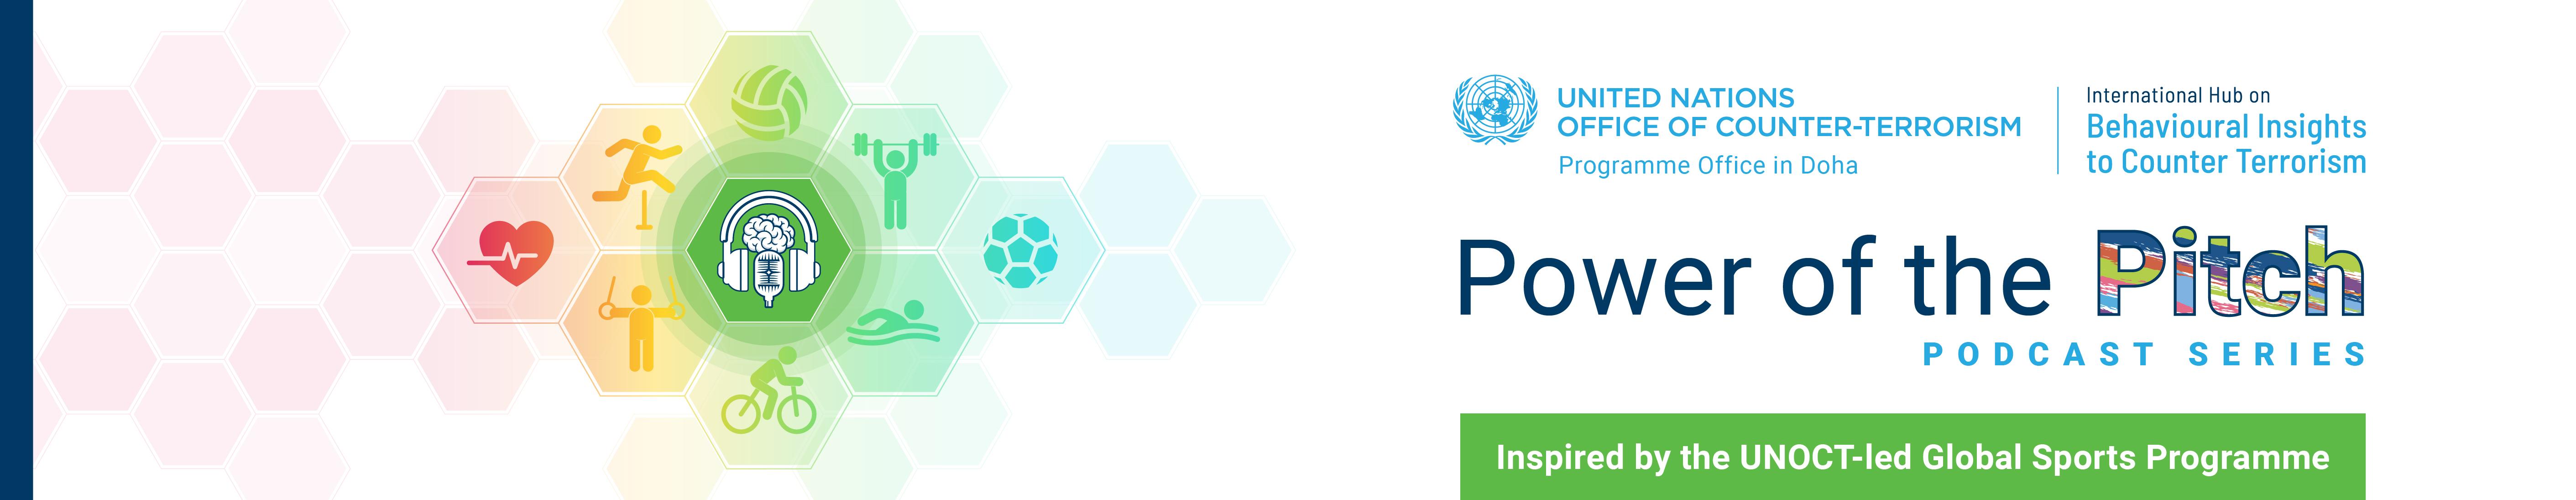 Power of the Pitch : Podcast by the UNOCT International Hub on